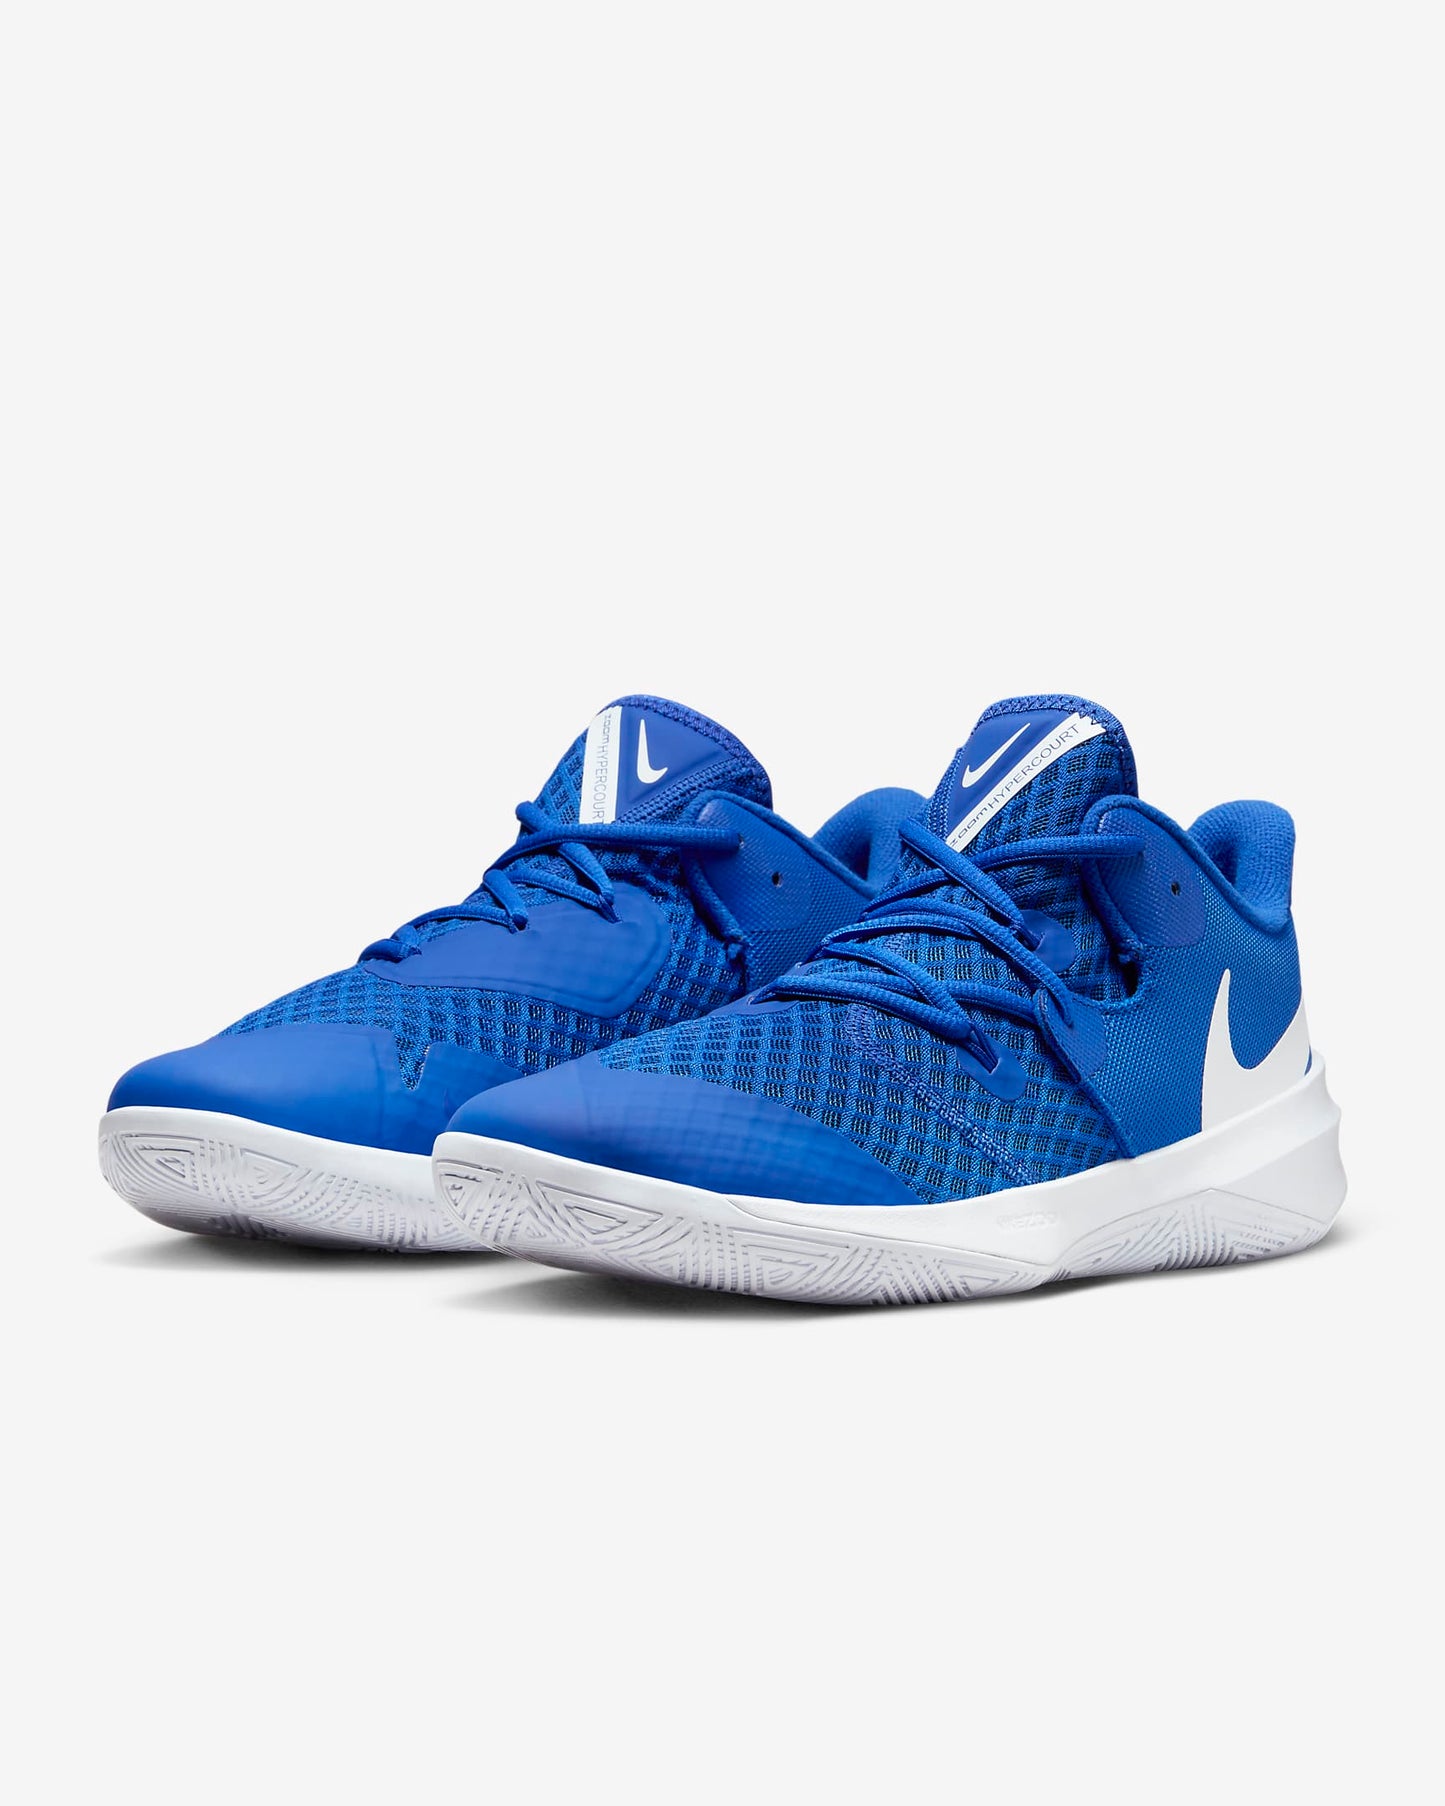 Nike Zoom Hyperspeed court Shoes (Blue)